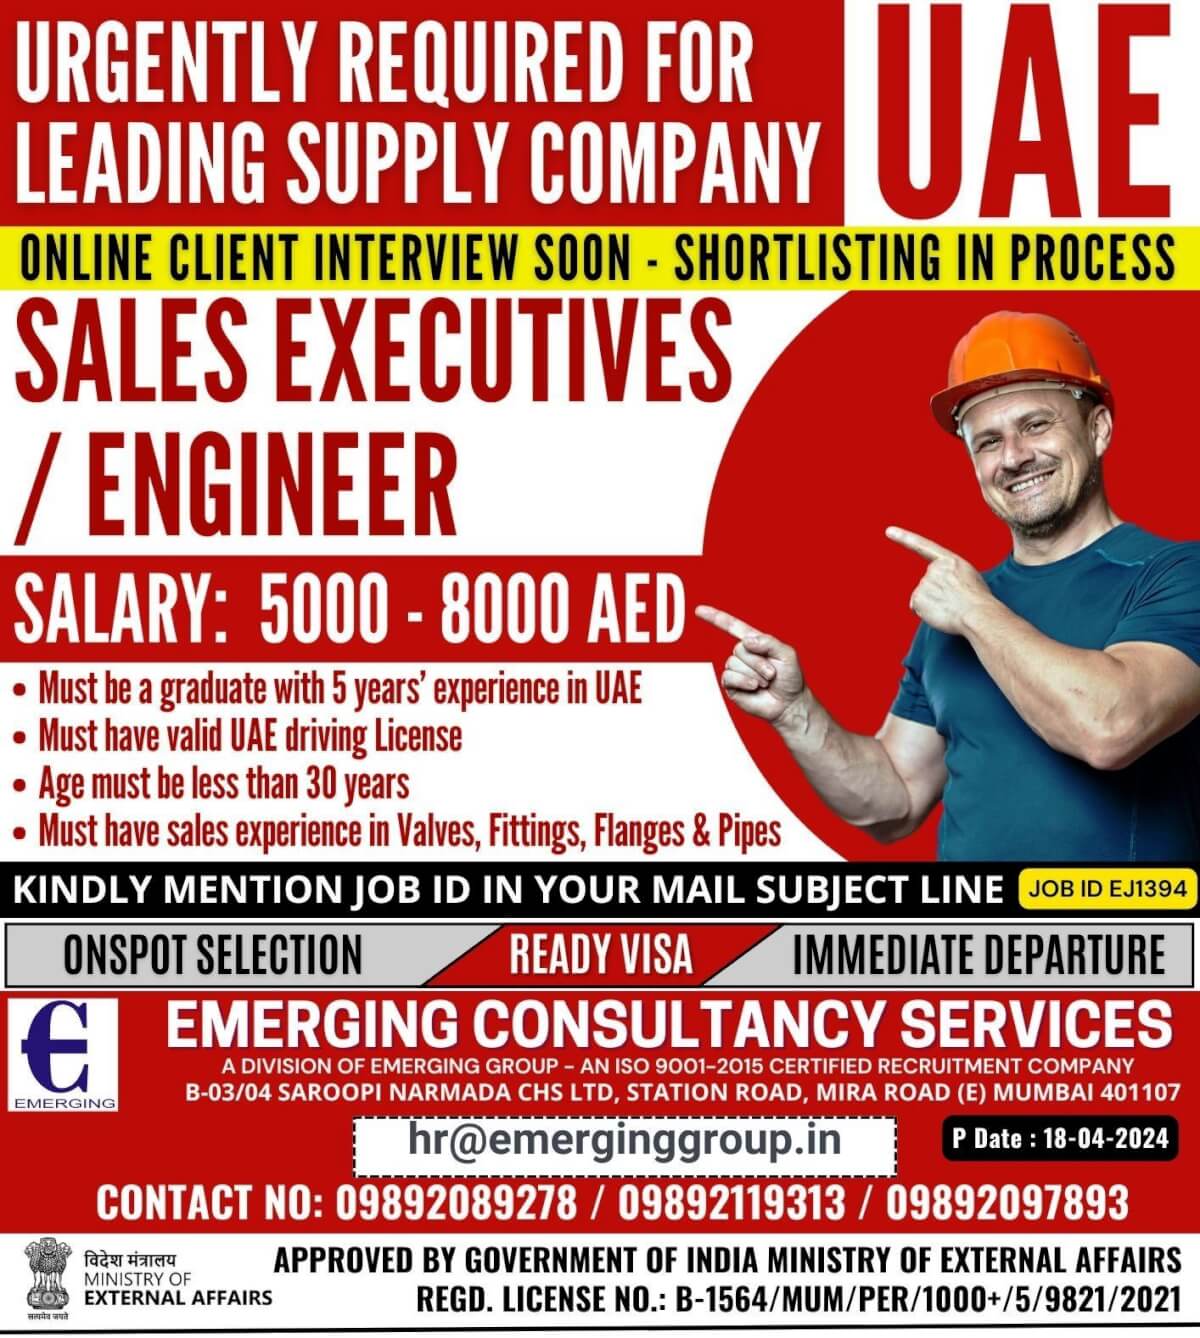 URGENTLY REQUIRED FOR LEADING SUPPLY COMPANY IN UAE